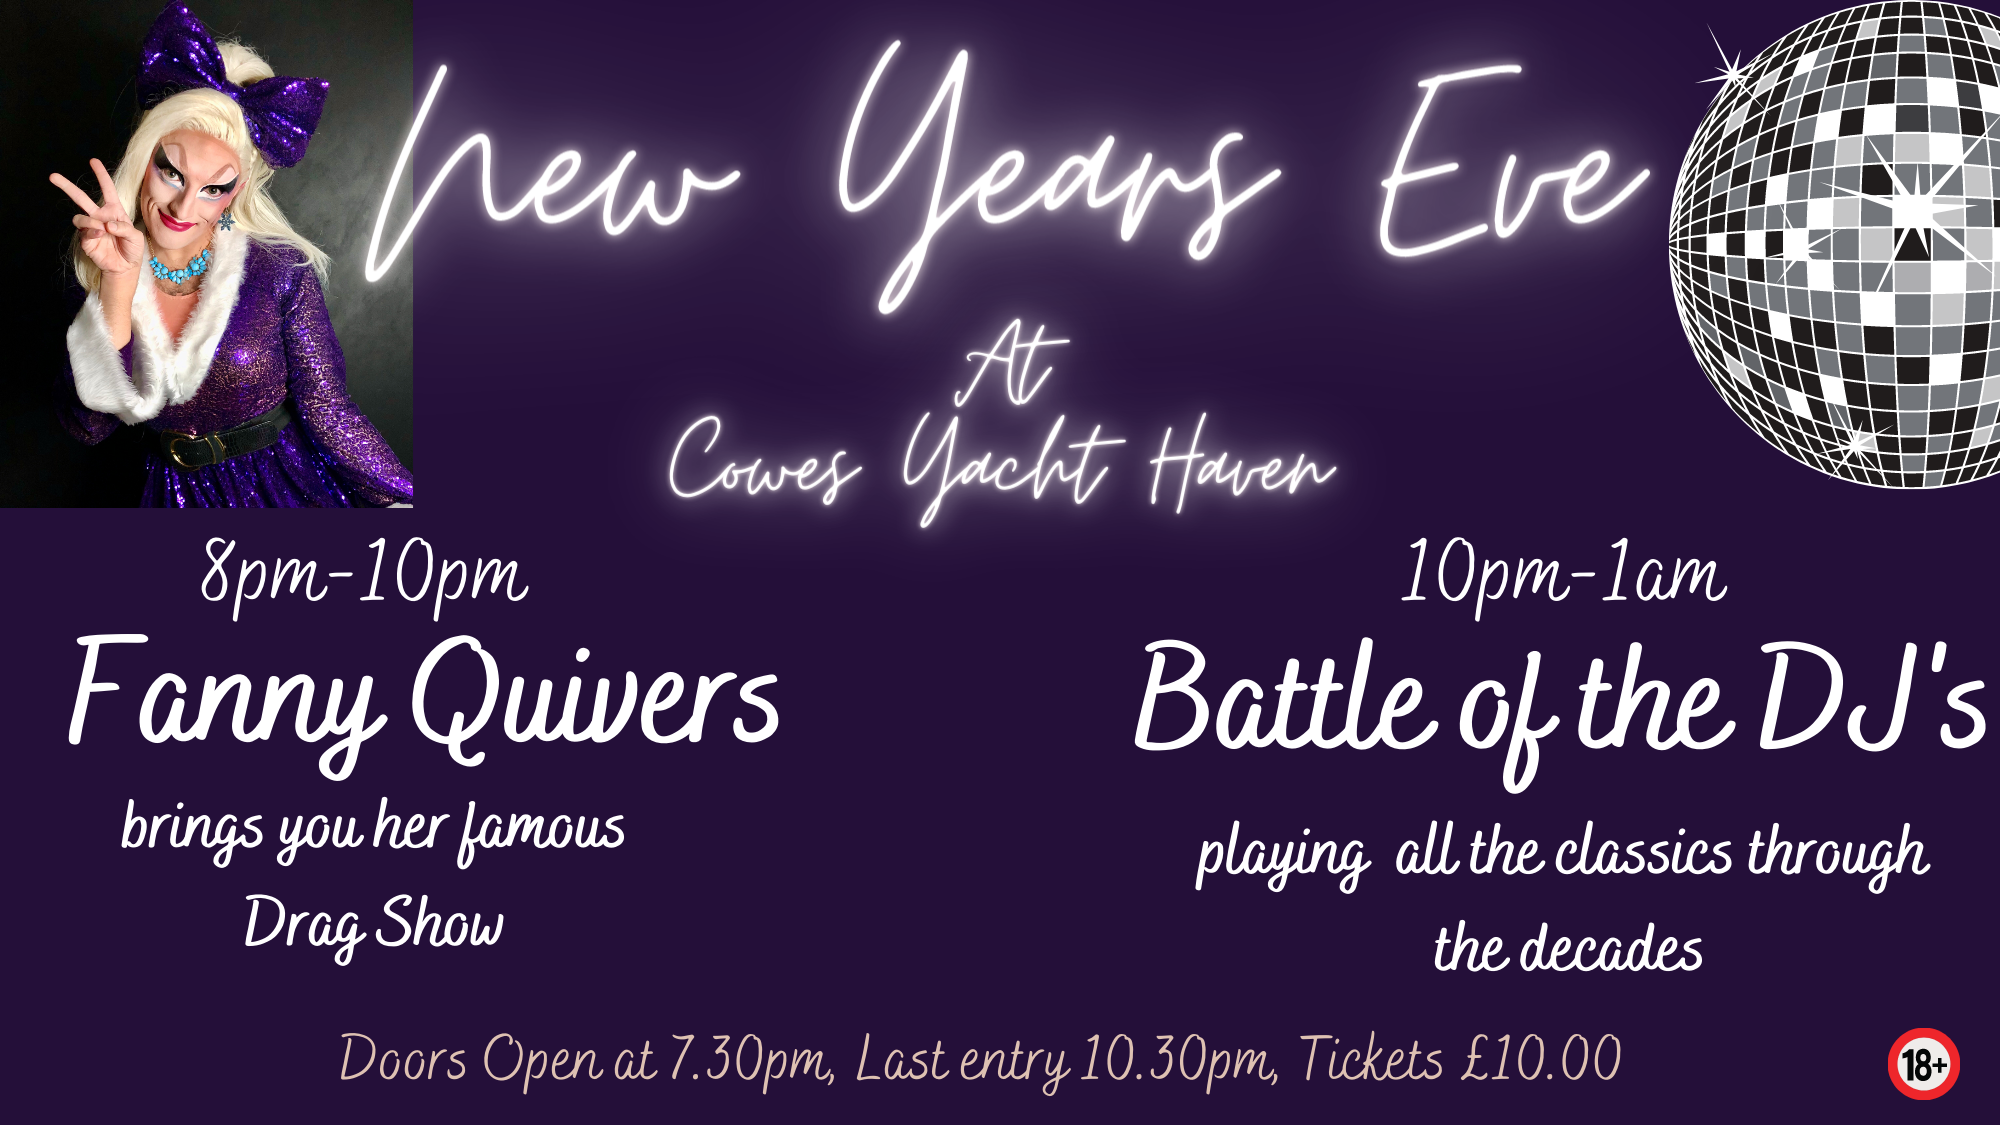 cowes yacht haven new years eve